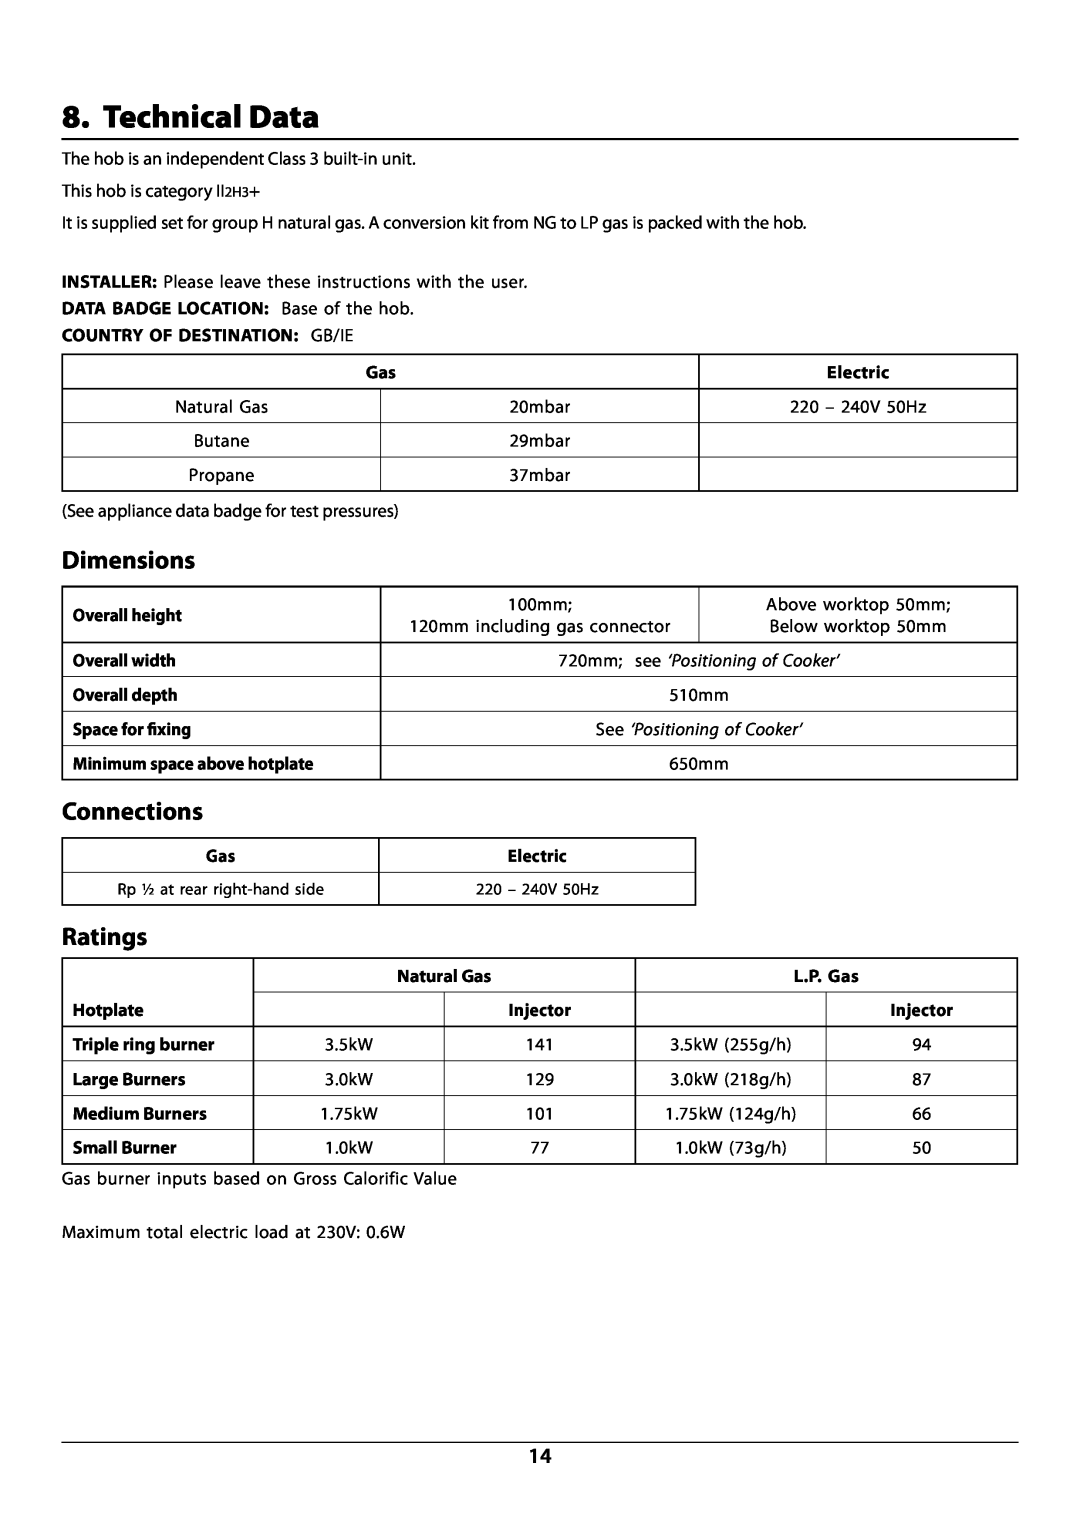 Rangemaster RG70 manual Technical Data, Dimensions, Connections, Ratings, 720mm see ‘Positioning of Cooker’ 